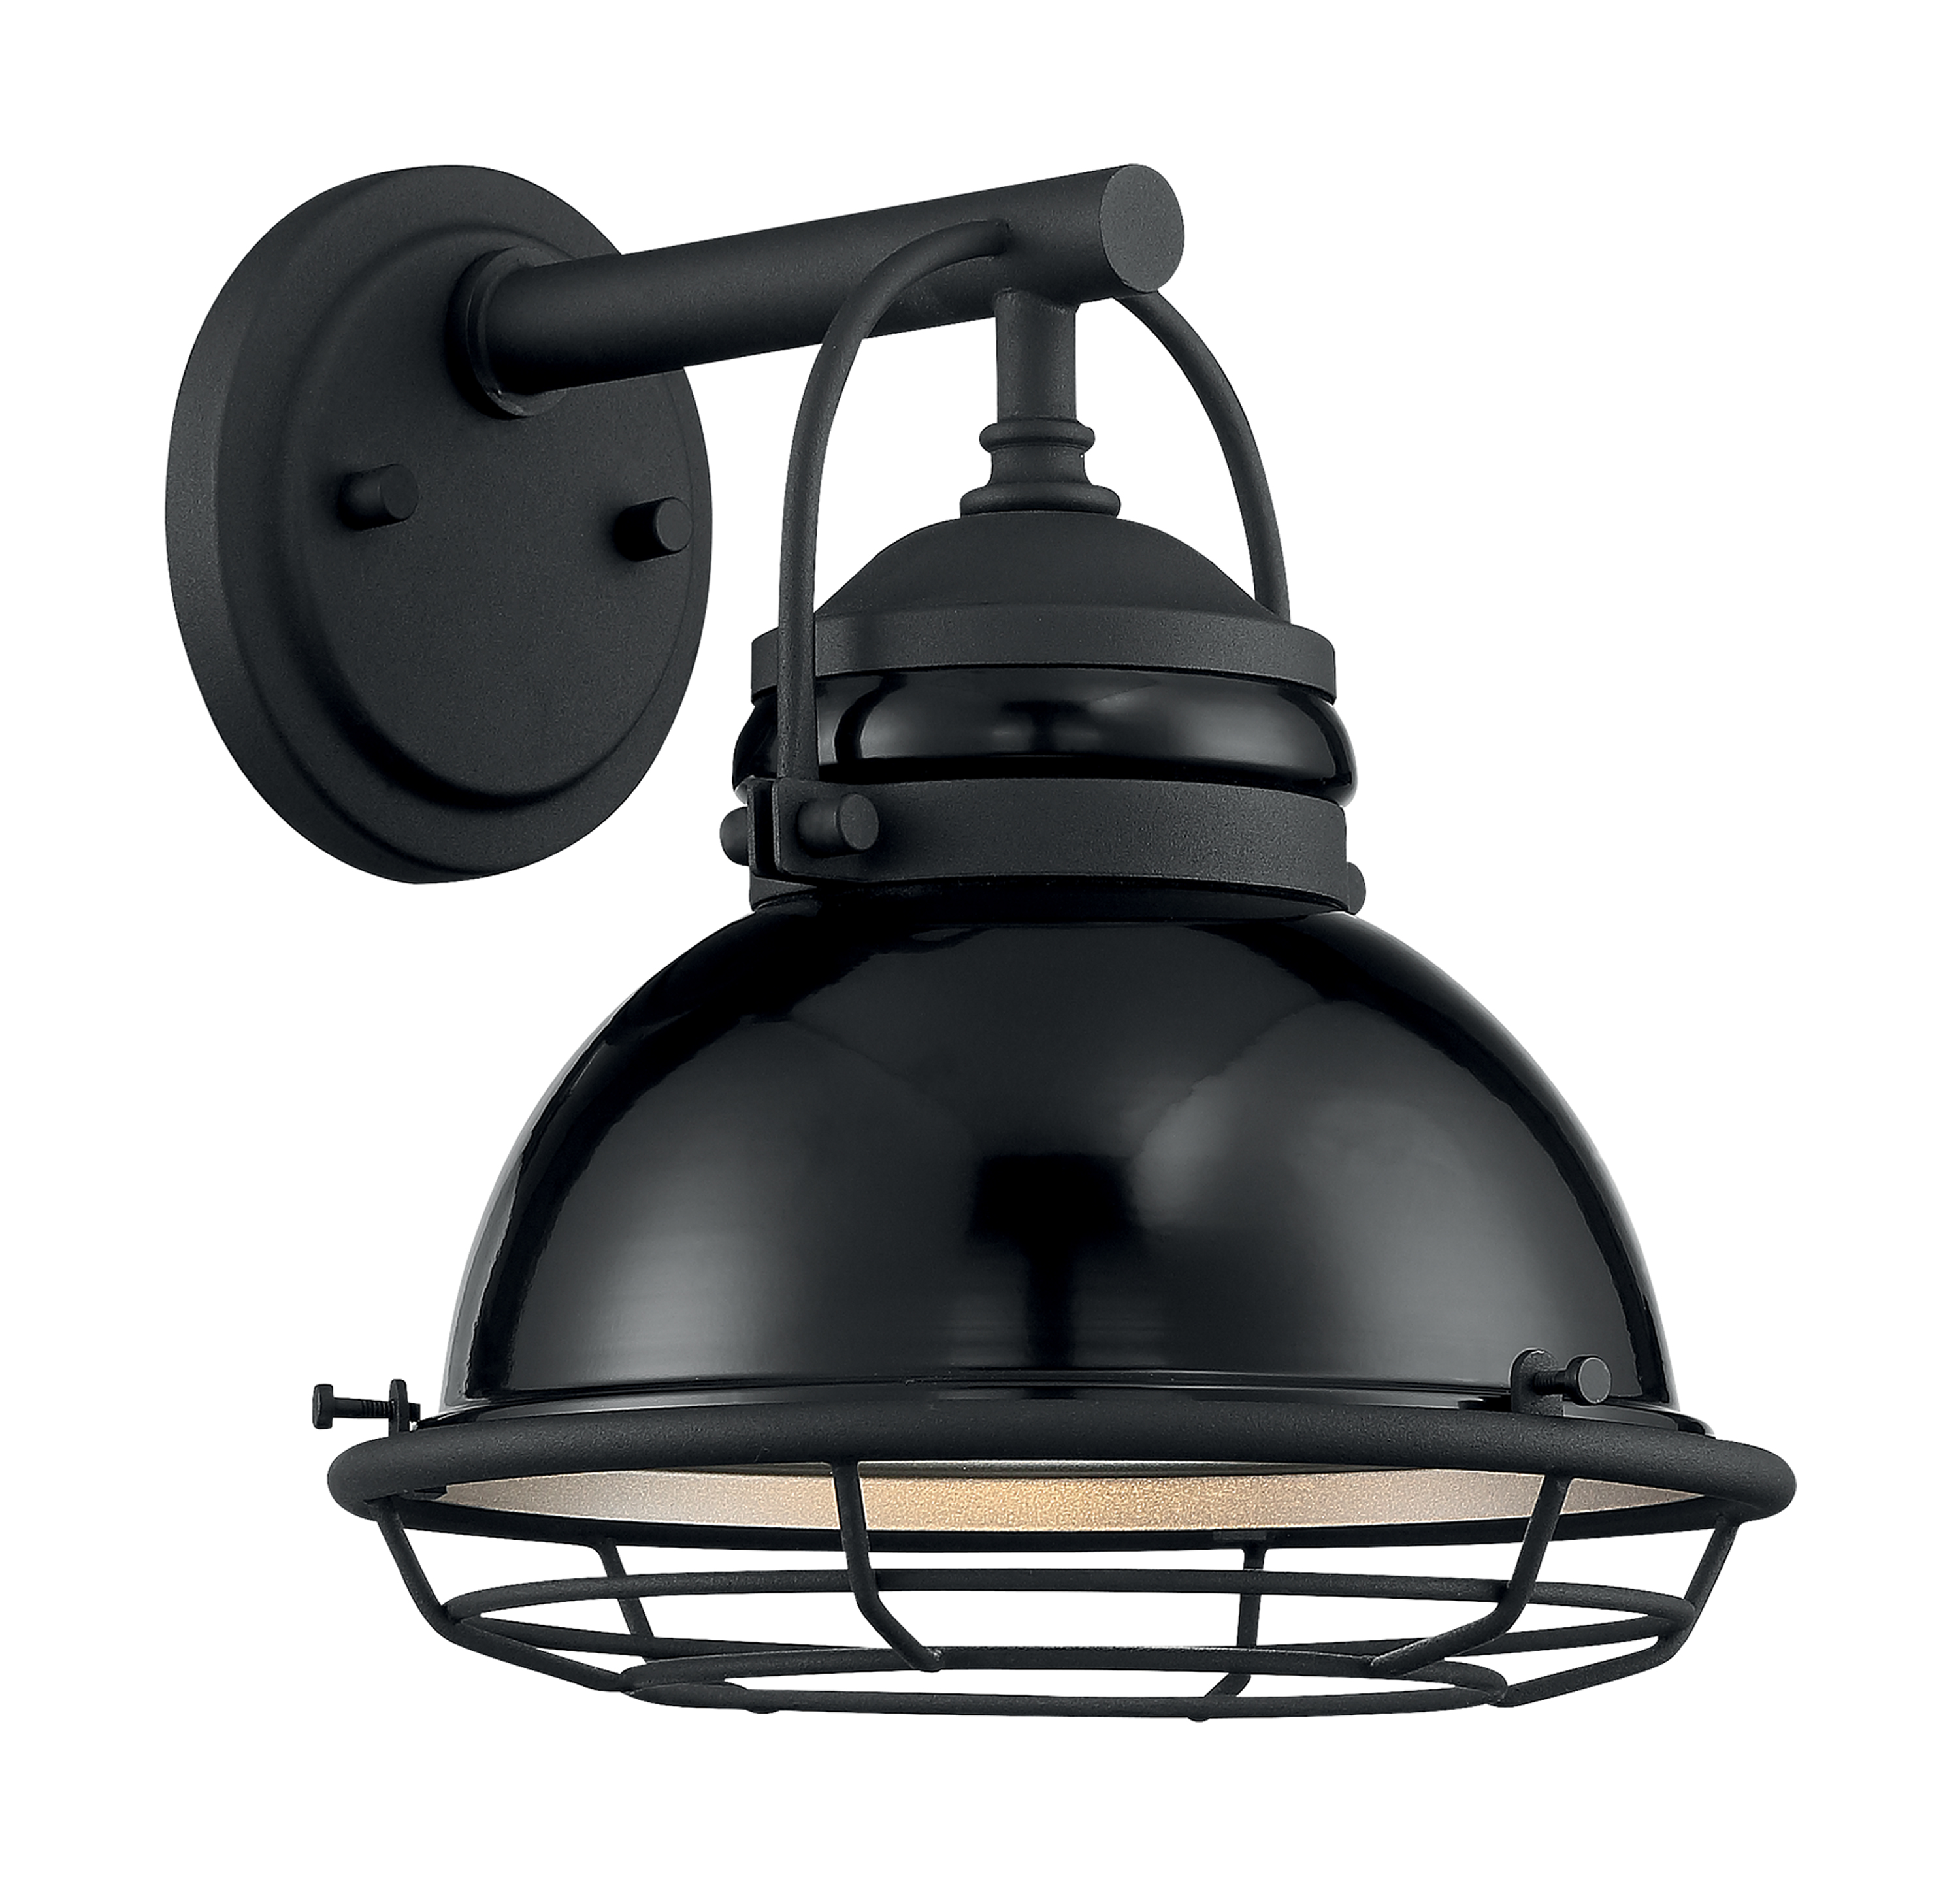 Upton 1-Light Small Outdoor Wall Sconce Fixture - Gloss Black Finish with Silver and Textured Black Accents